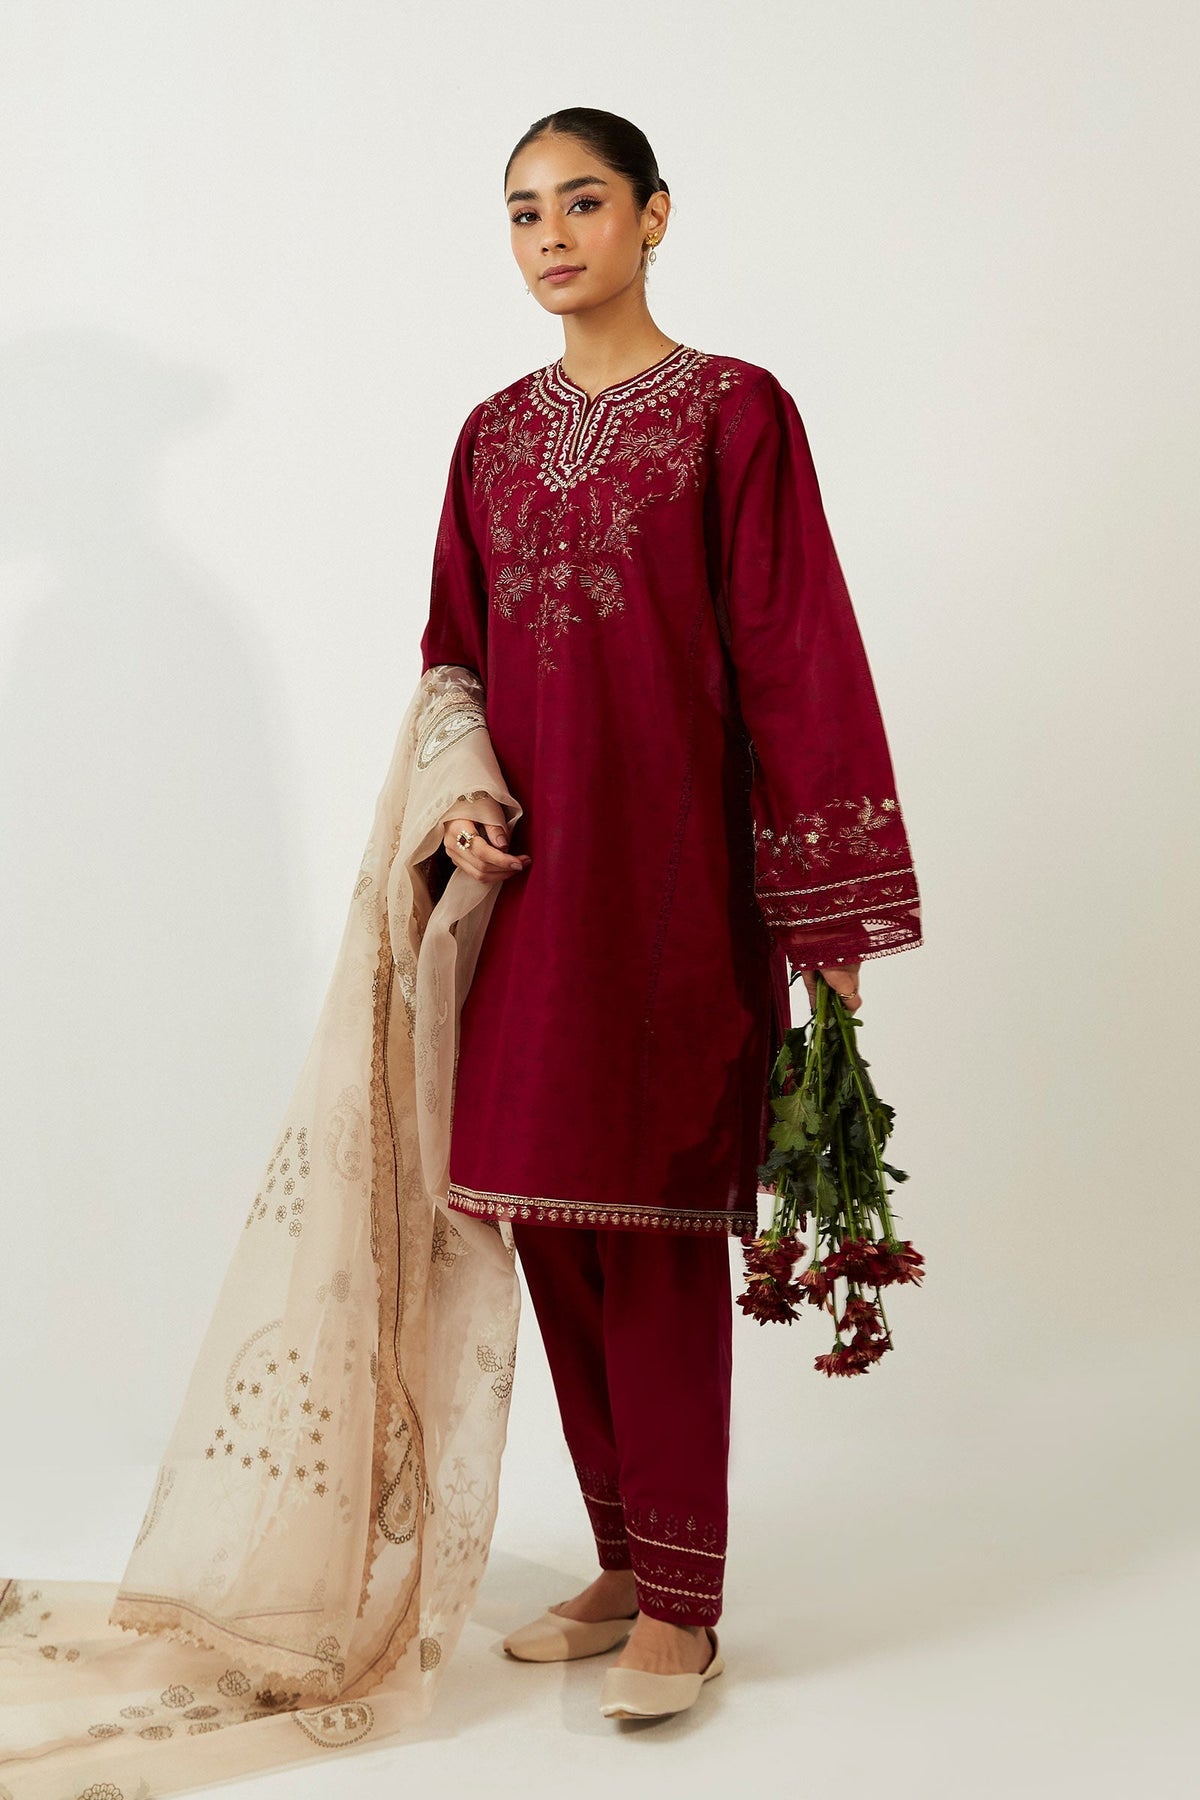 Buy Now, 1A - Coco Lawn Collection Vol.2 - Zara Shahjahan - Coco by Zara Shahjahan - Shahana Collection UK - Wedding and Bridal Party Dresses - Summer Lawn 2023